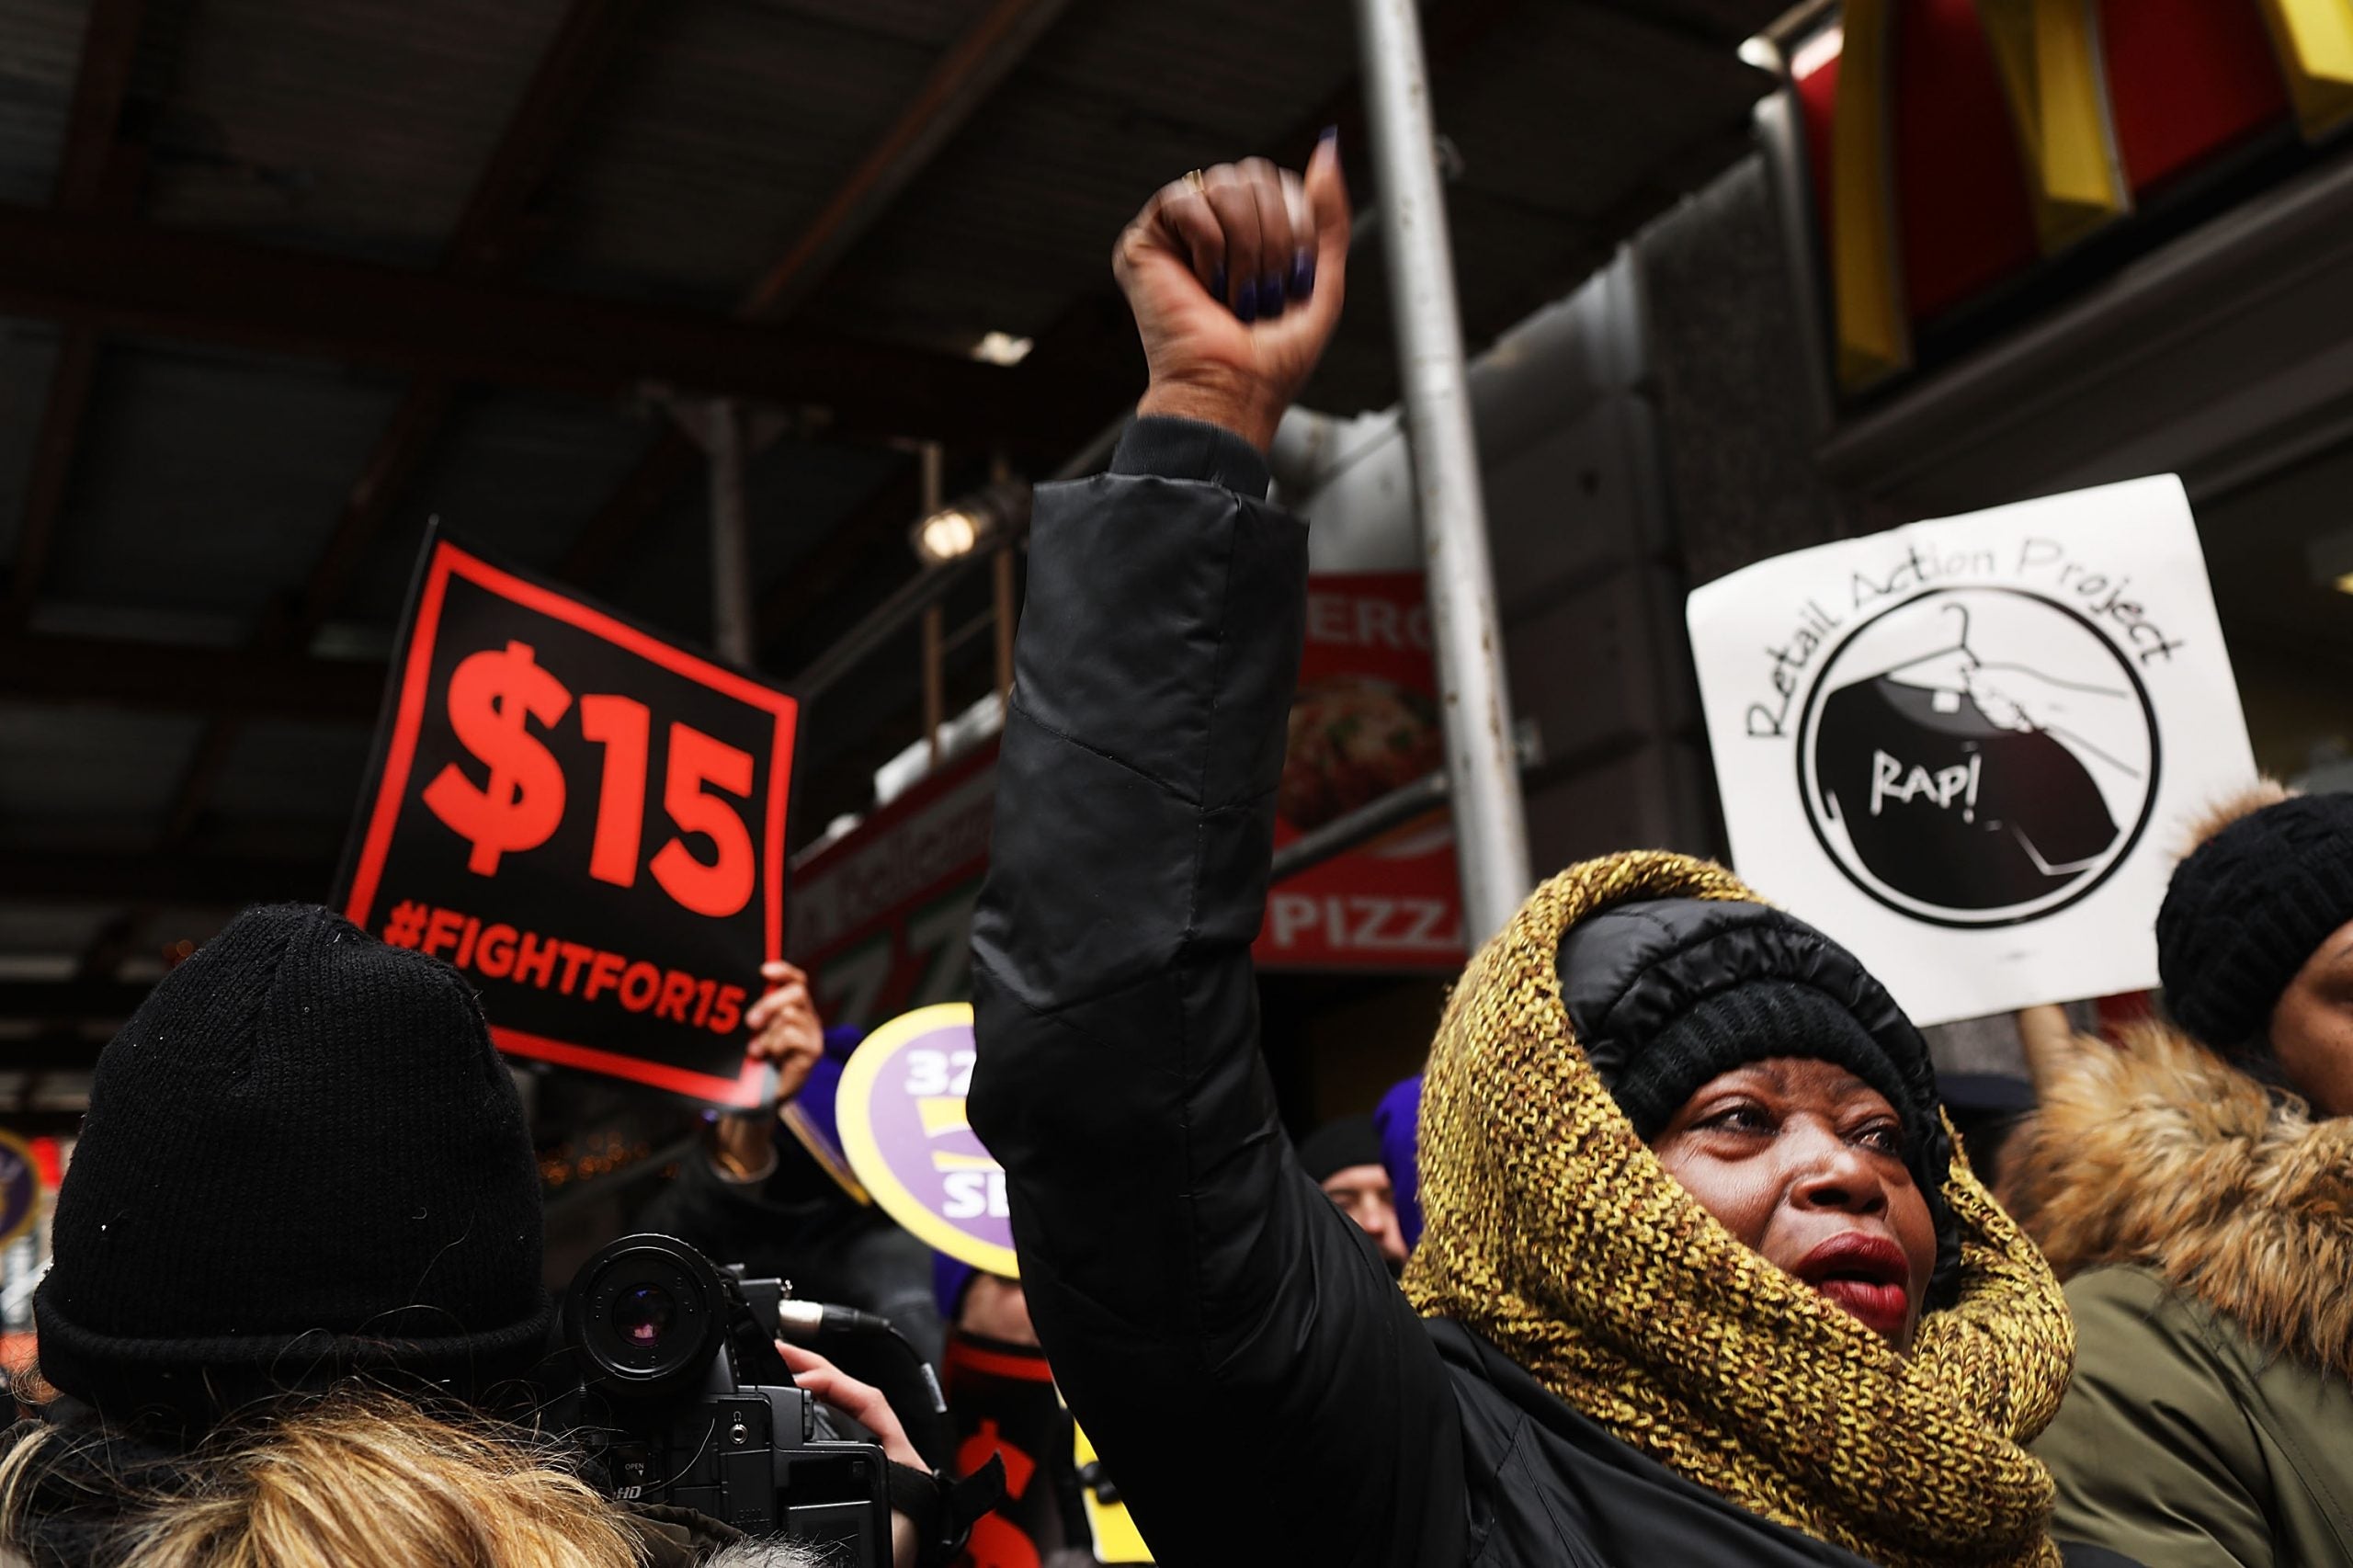 McDonald's Workers on Strike Today for Higher Wages Across 15 Cities